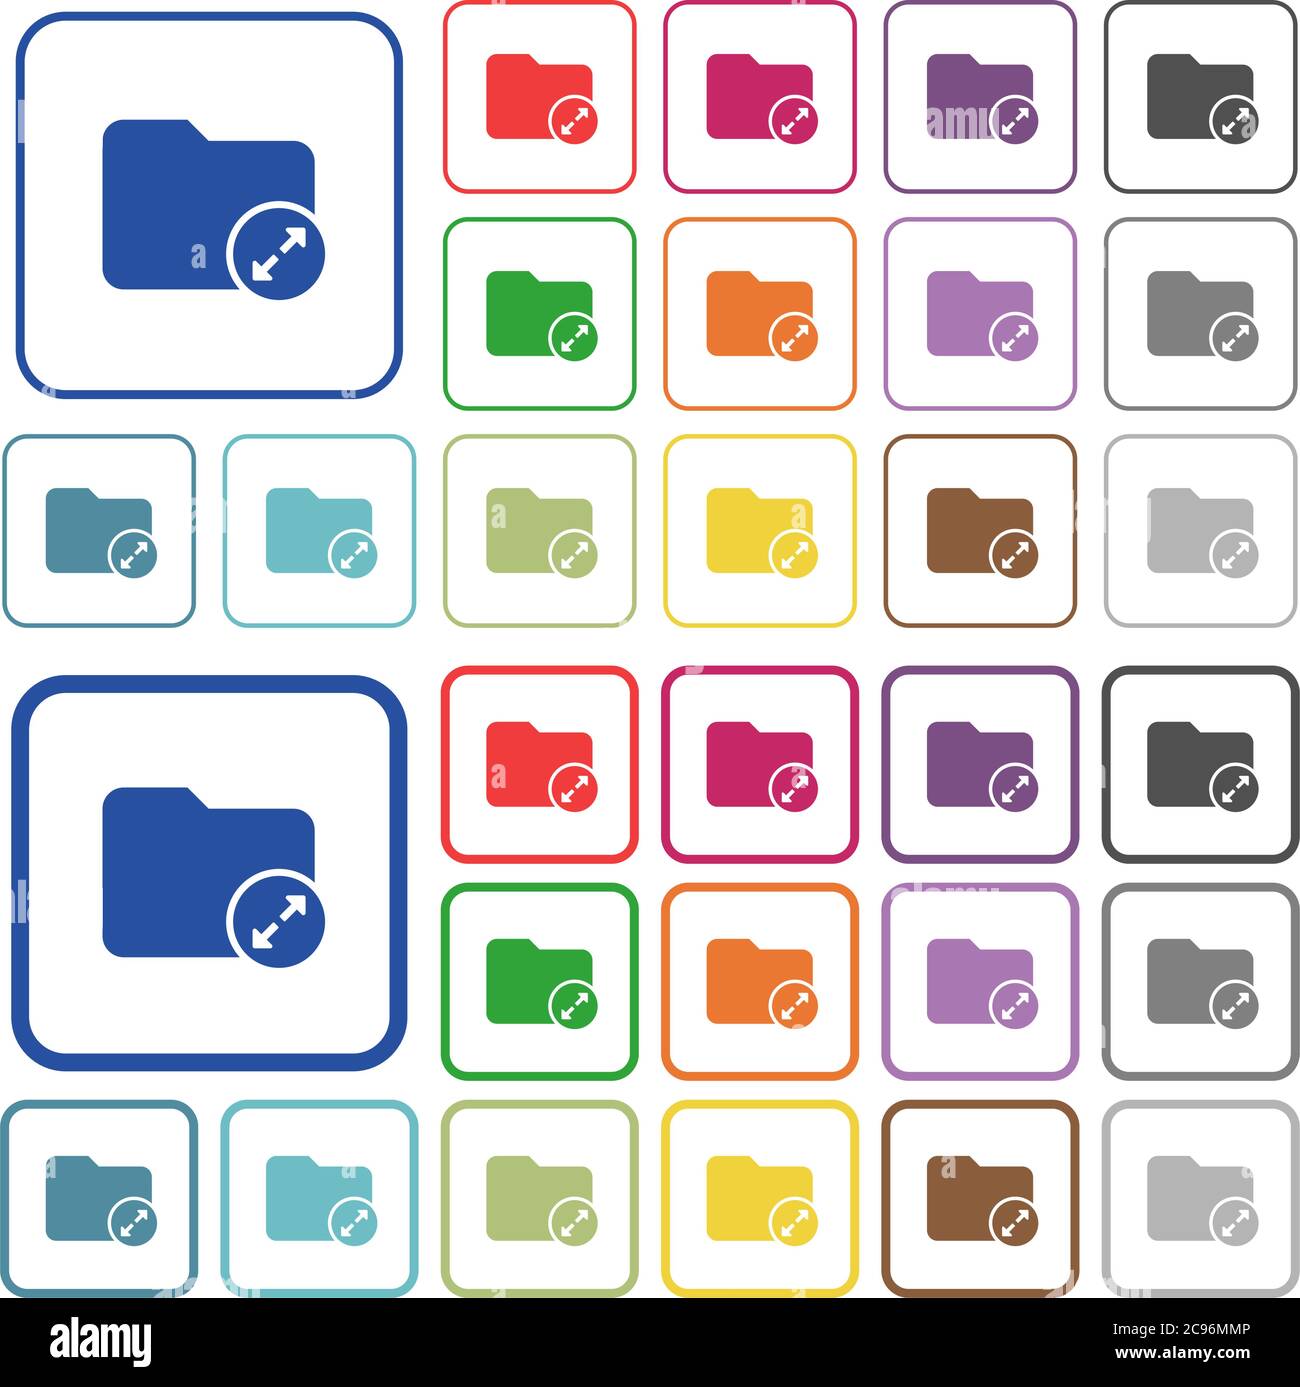 Uncompress directory color flat icons in rounded square frames. Thin and thick versions included. Stock Vector